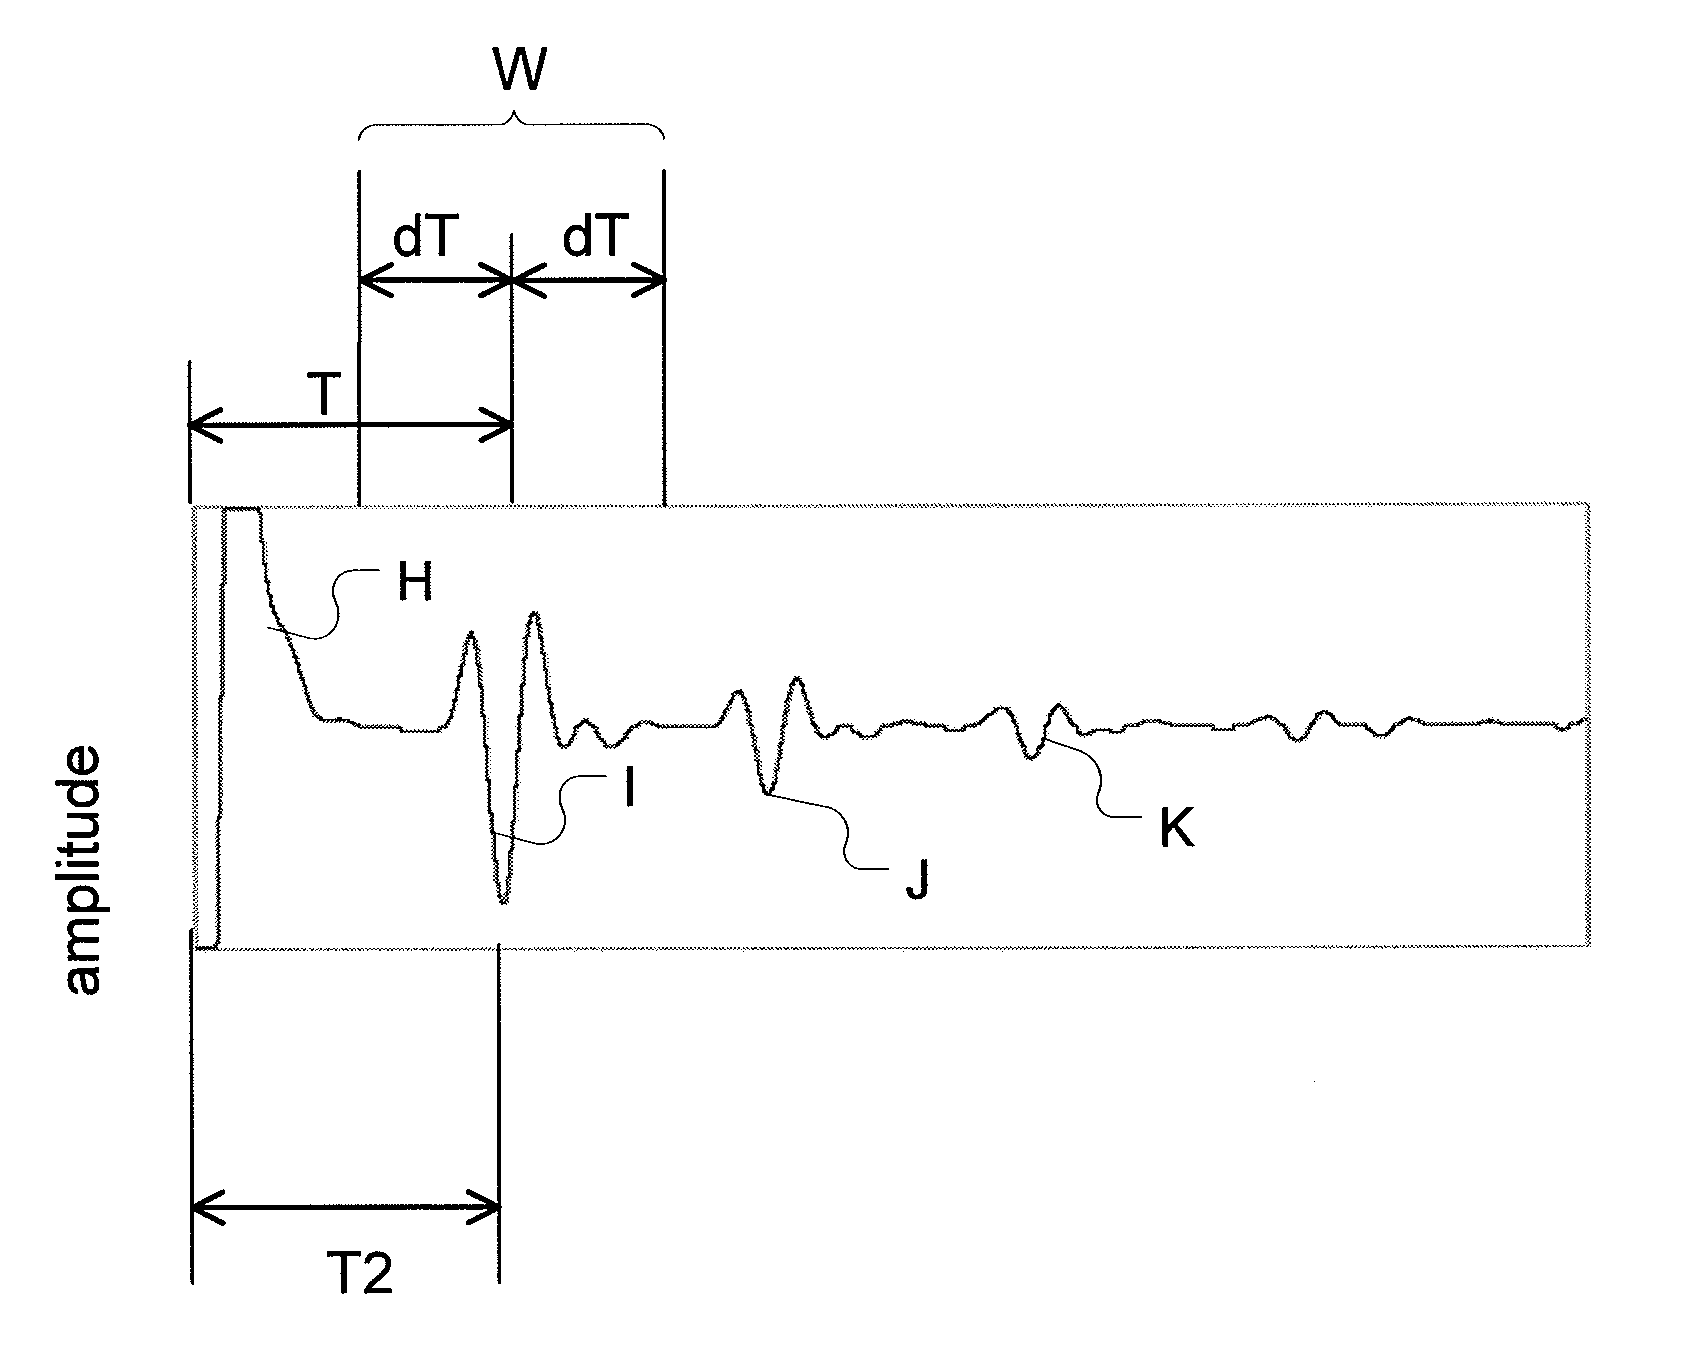 Automatic calibration error detection for ultrasonic inspection devices